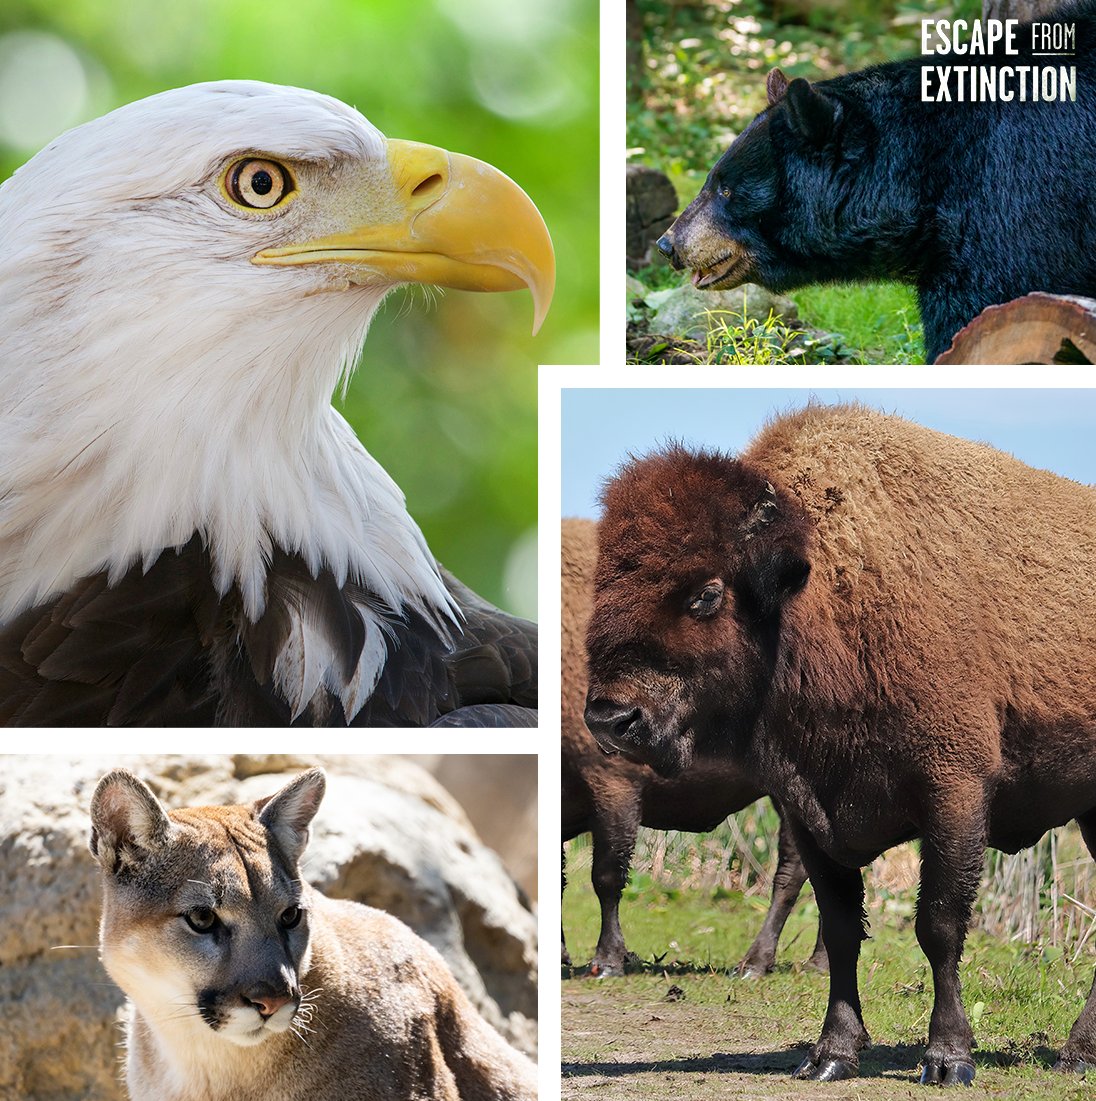 According to a new @IUCNRedList report, the United States has the second-highest number of endangered species in the world -- surpassed only by Indonesia. California, Florida, and Arizona are the top stops for these species. bit.ly/3NeTbJS  #EscapefromExtinction